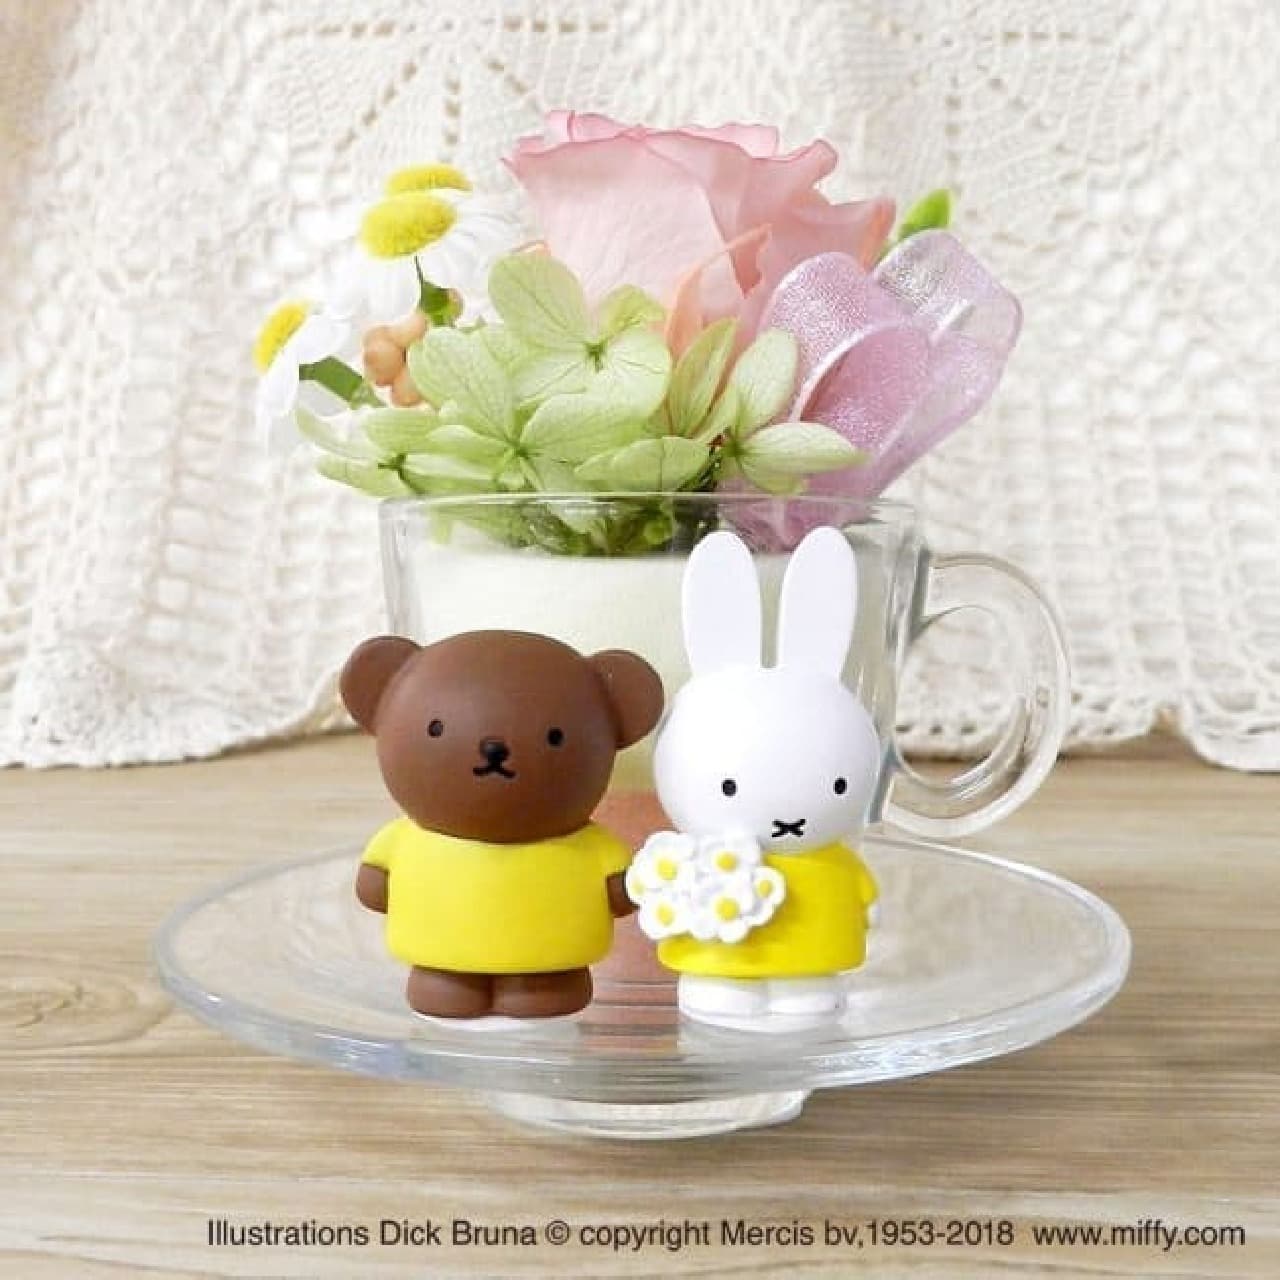 Miffy gift items such as flower box arrangements and photo stands